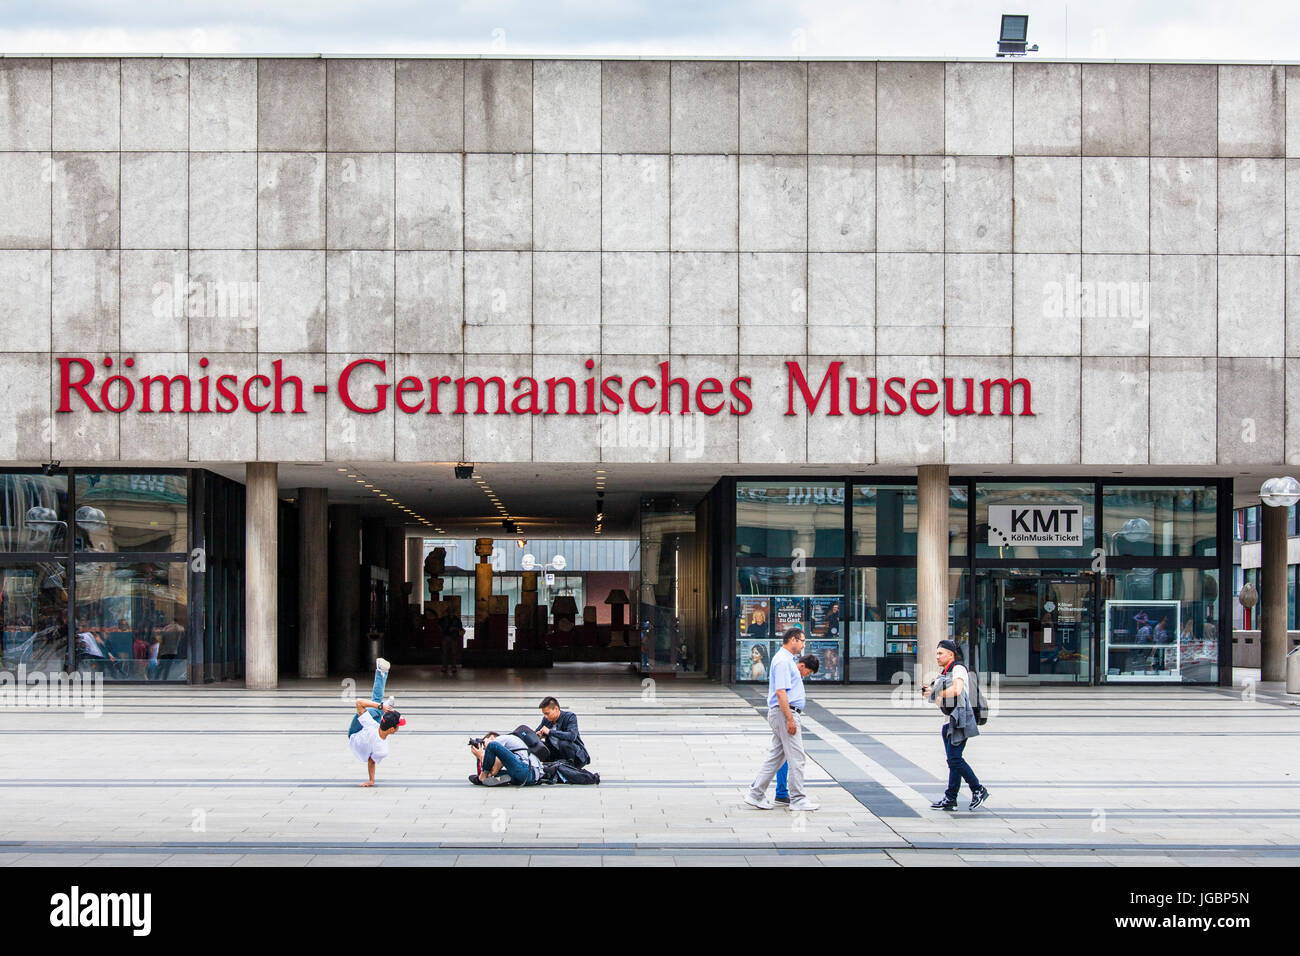 Europe, Germany, North Rhine-Westphalia, Cologne, the Romano-Germanic Museum at the Roncalli square. Stock Photo